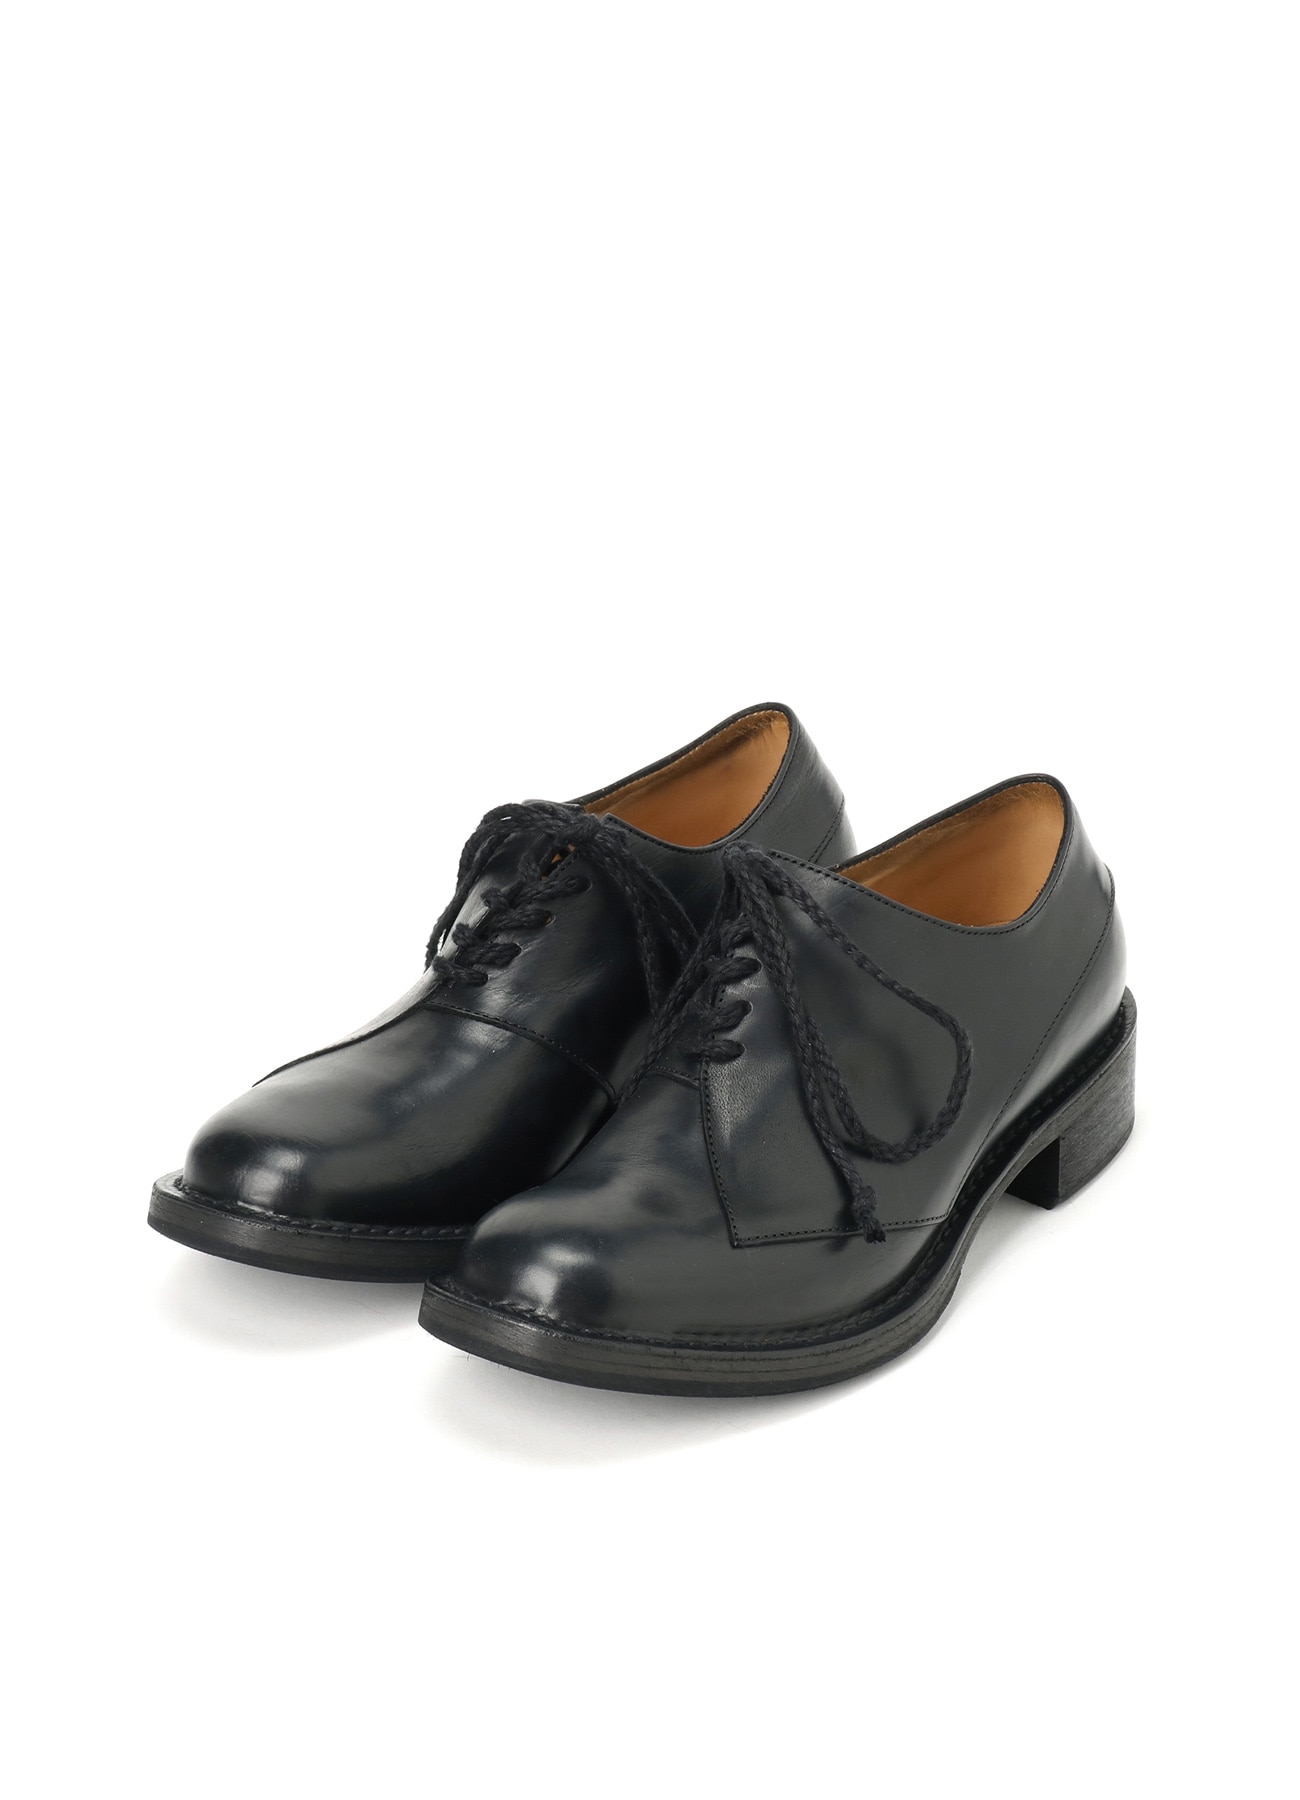 TUMBLED COWHIDE LEATHER DERBY SHOES